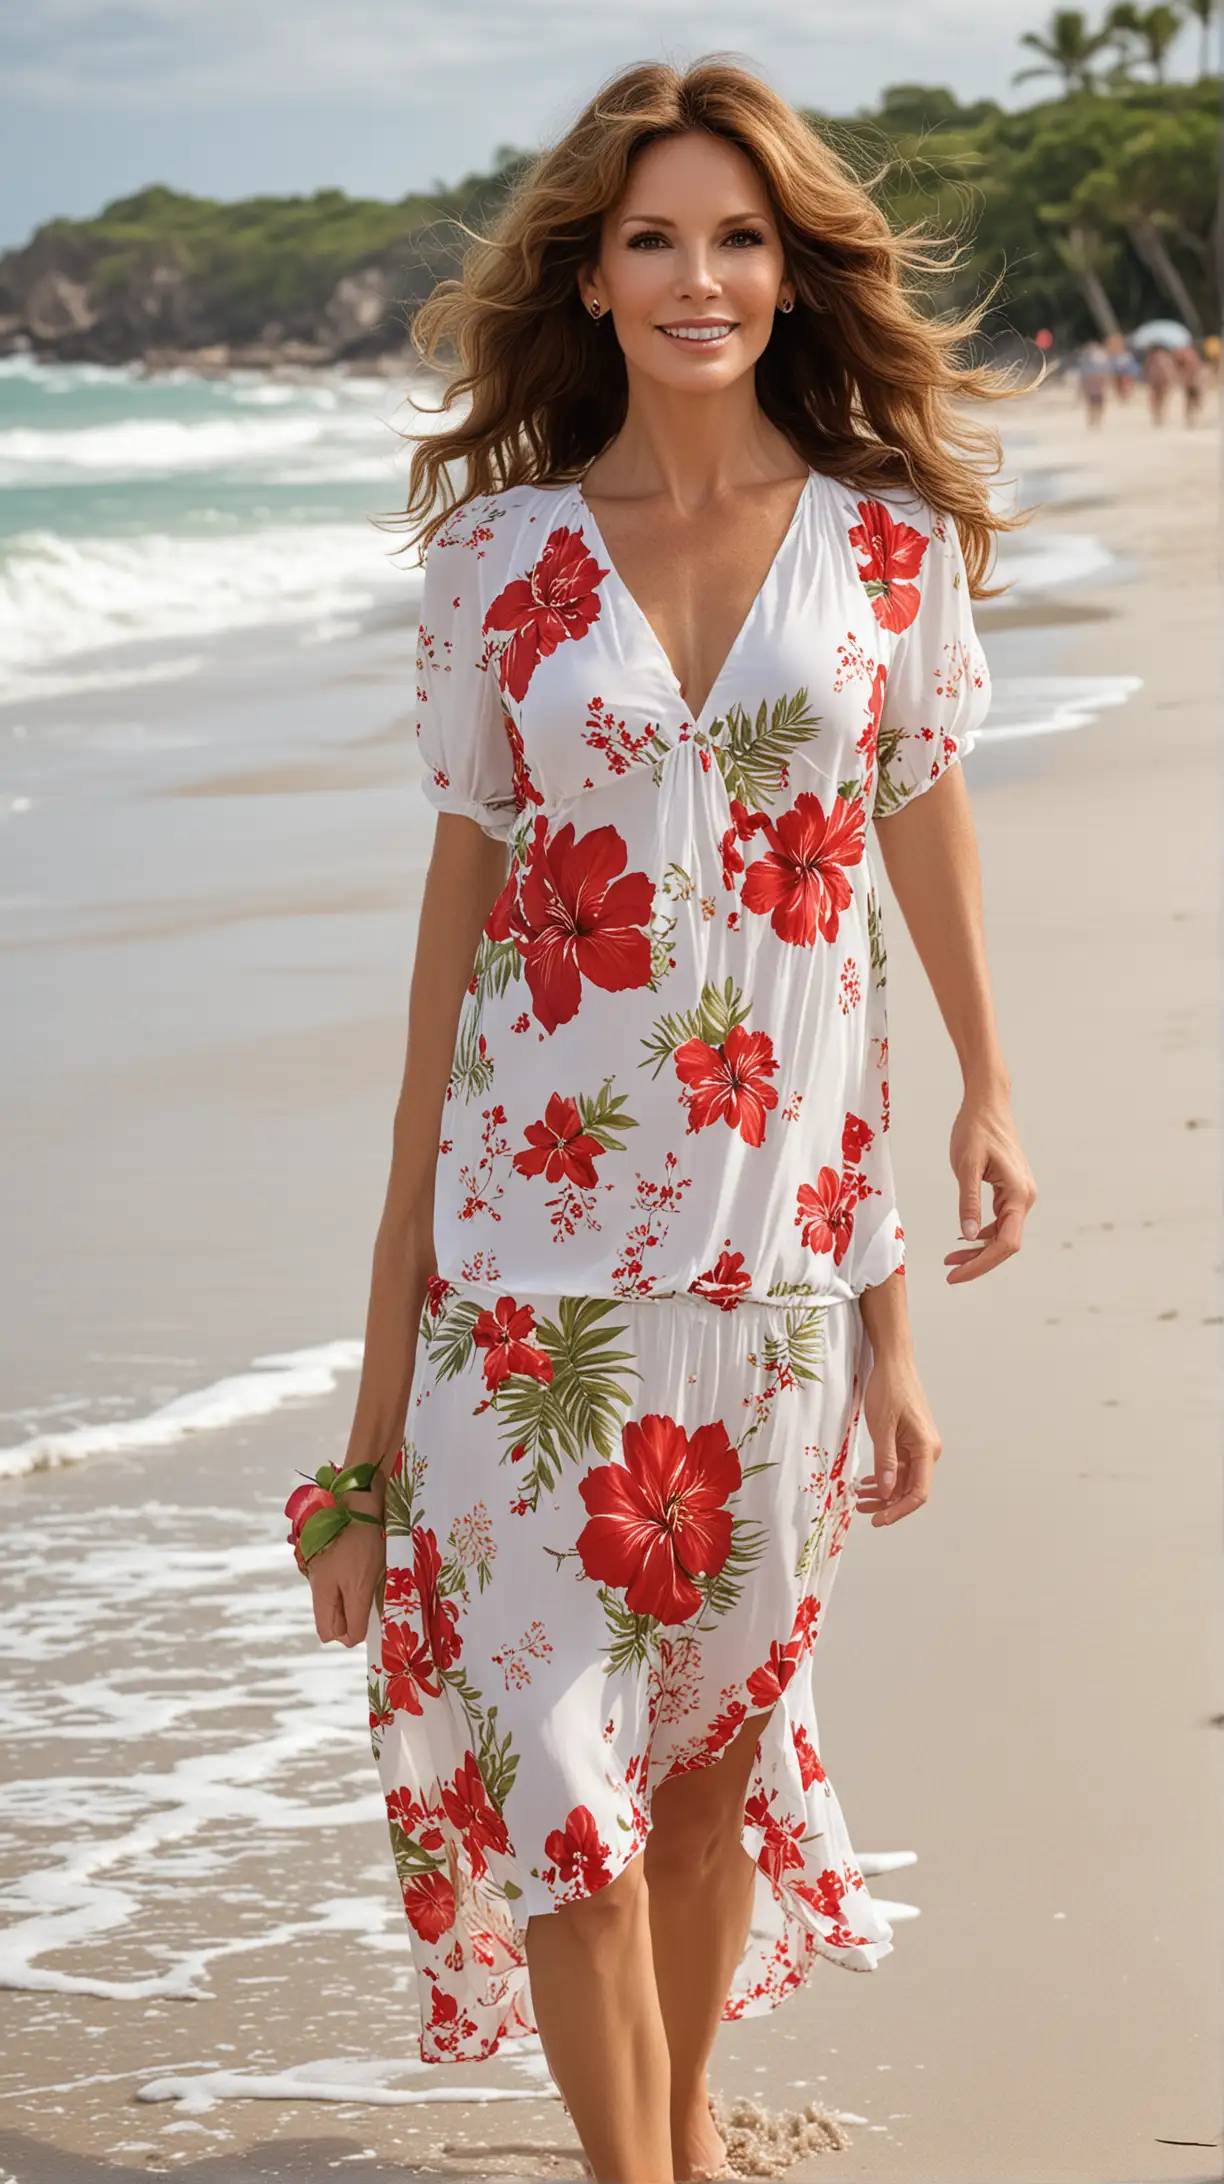 A slim realistic Jaclyn Smith regarde amoureusement sourire rafraîchissant wearing a 2 piece white tropical dress with a red flower in her long hair walking at the beach showing a full body shot from the top of his head to his feet